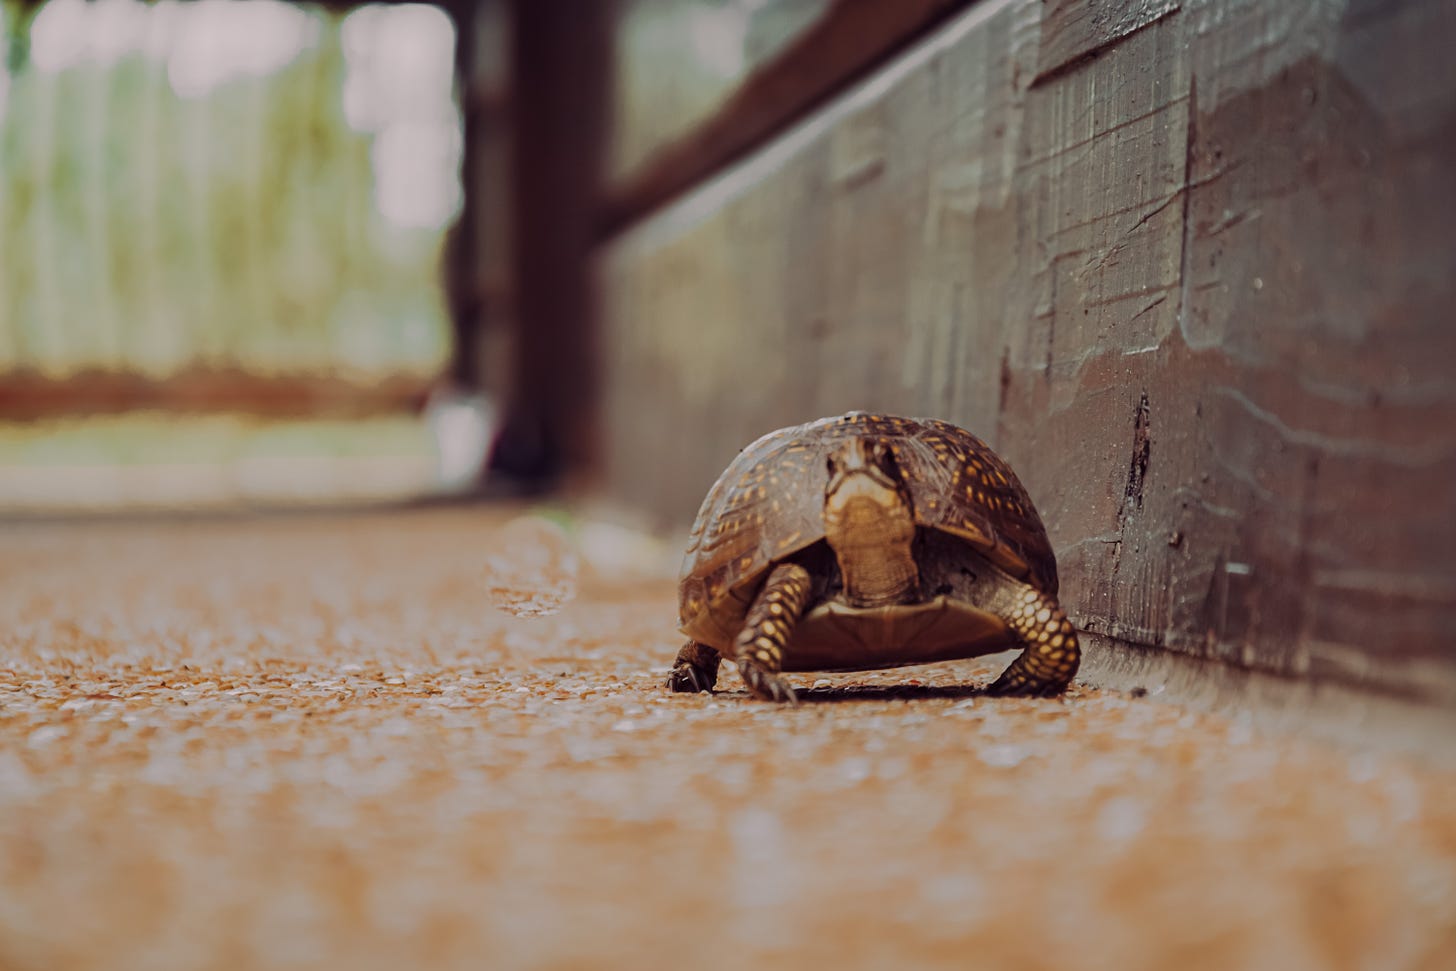 A brown turtle in the foreground walks along a brown surface. A dark brown wooden beam is on the right.